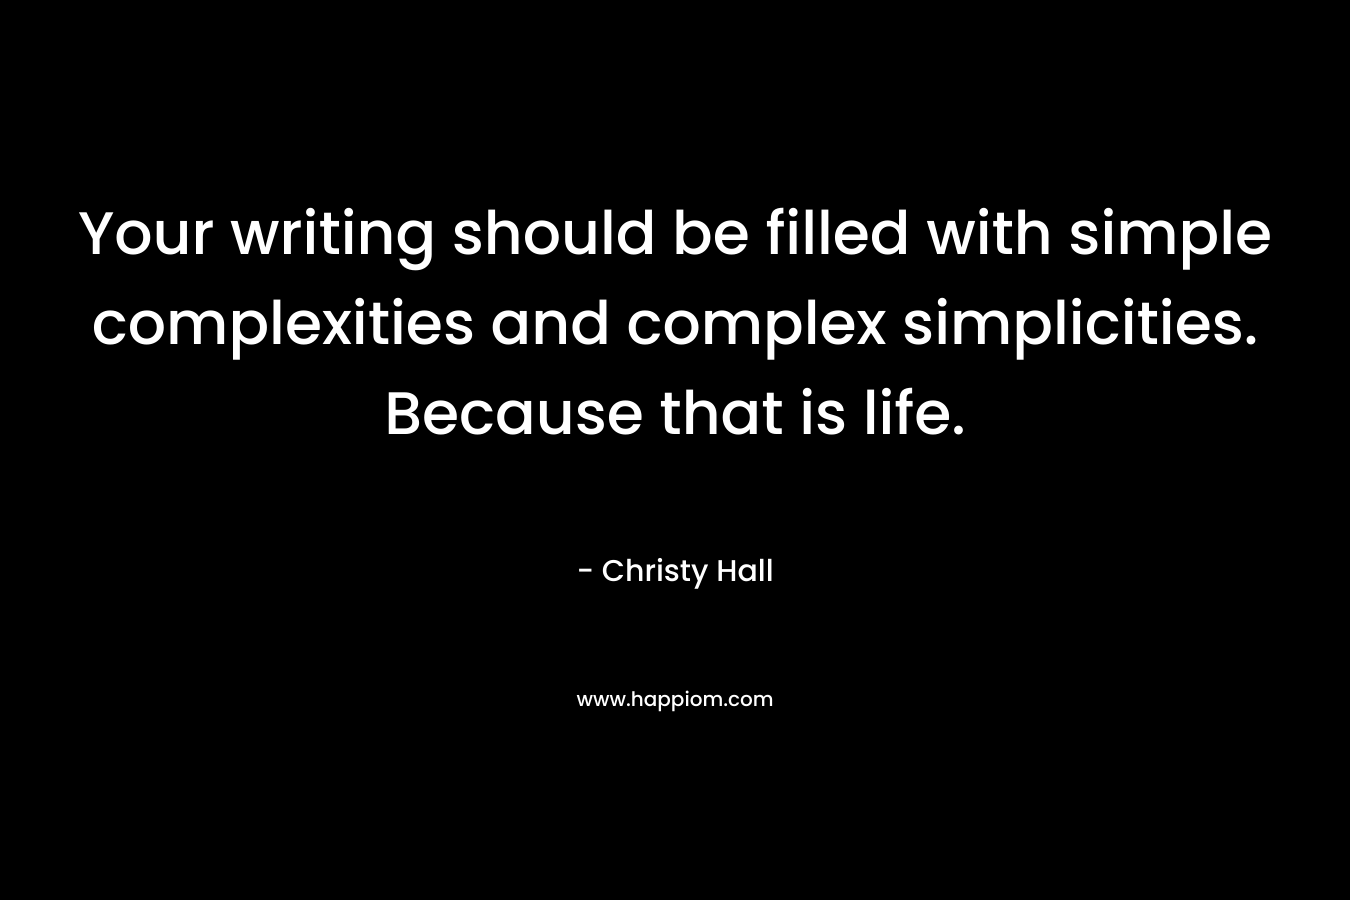 Your writing should be filled with simple complexities and complex simplicities. Because that is life.